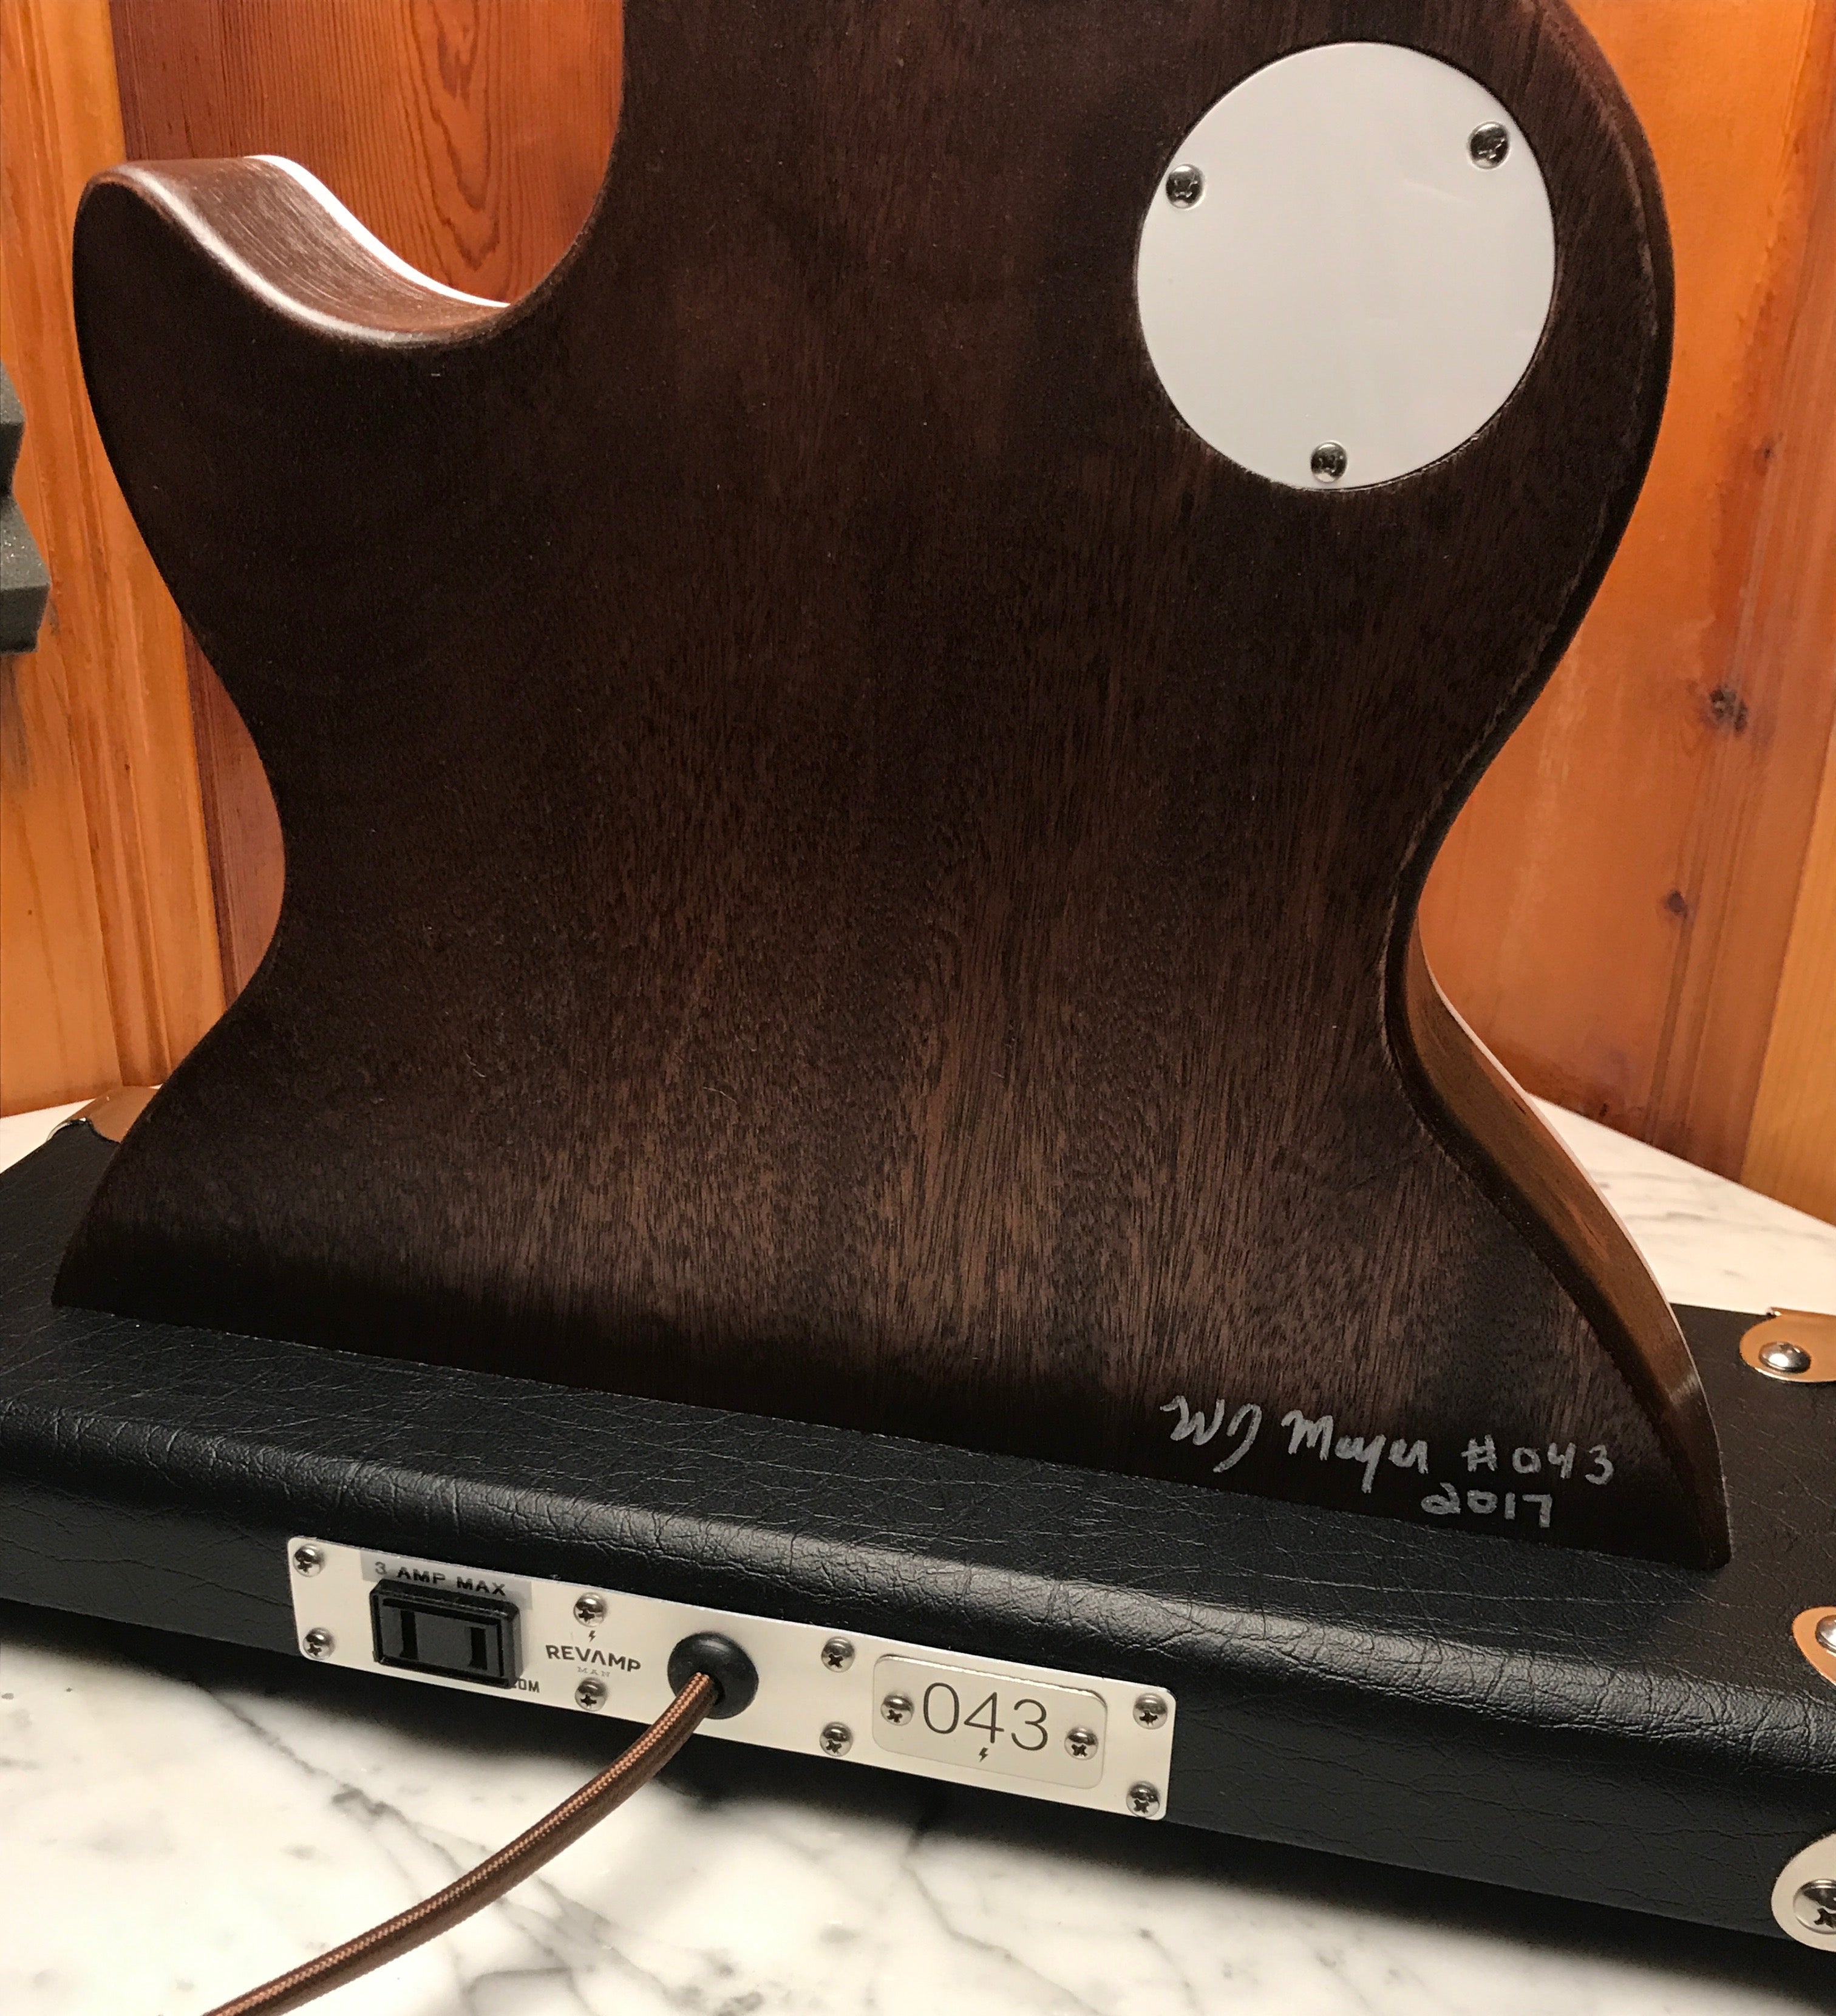 Guitar Lamp -  LP Style Bottoms Up Dark Wood # 043 of Collection